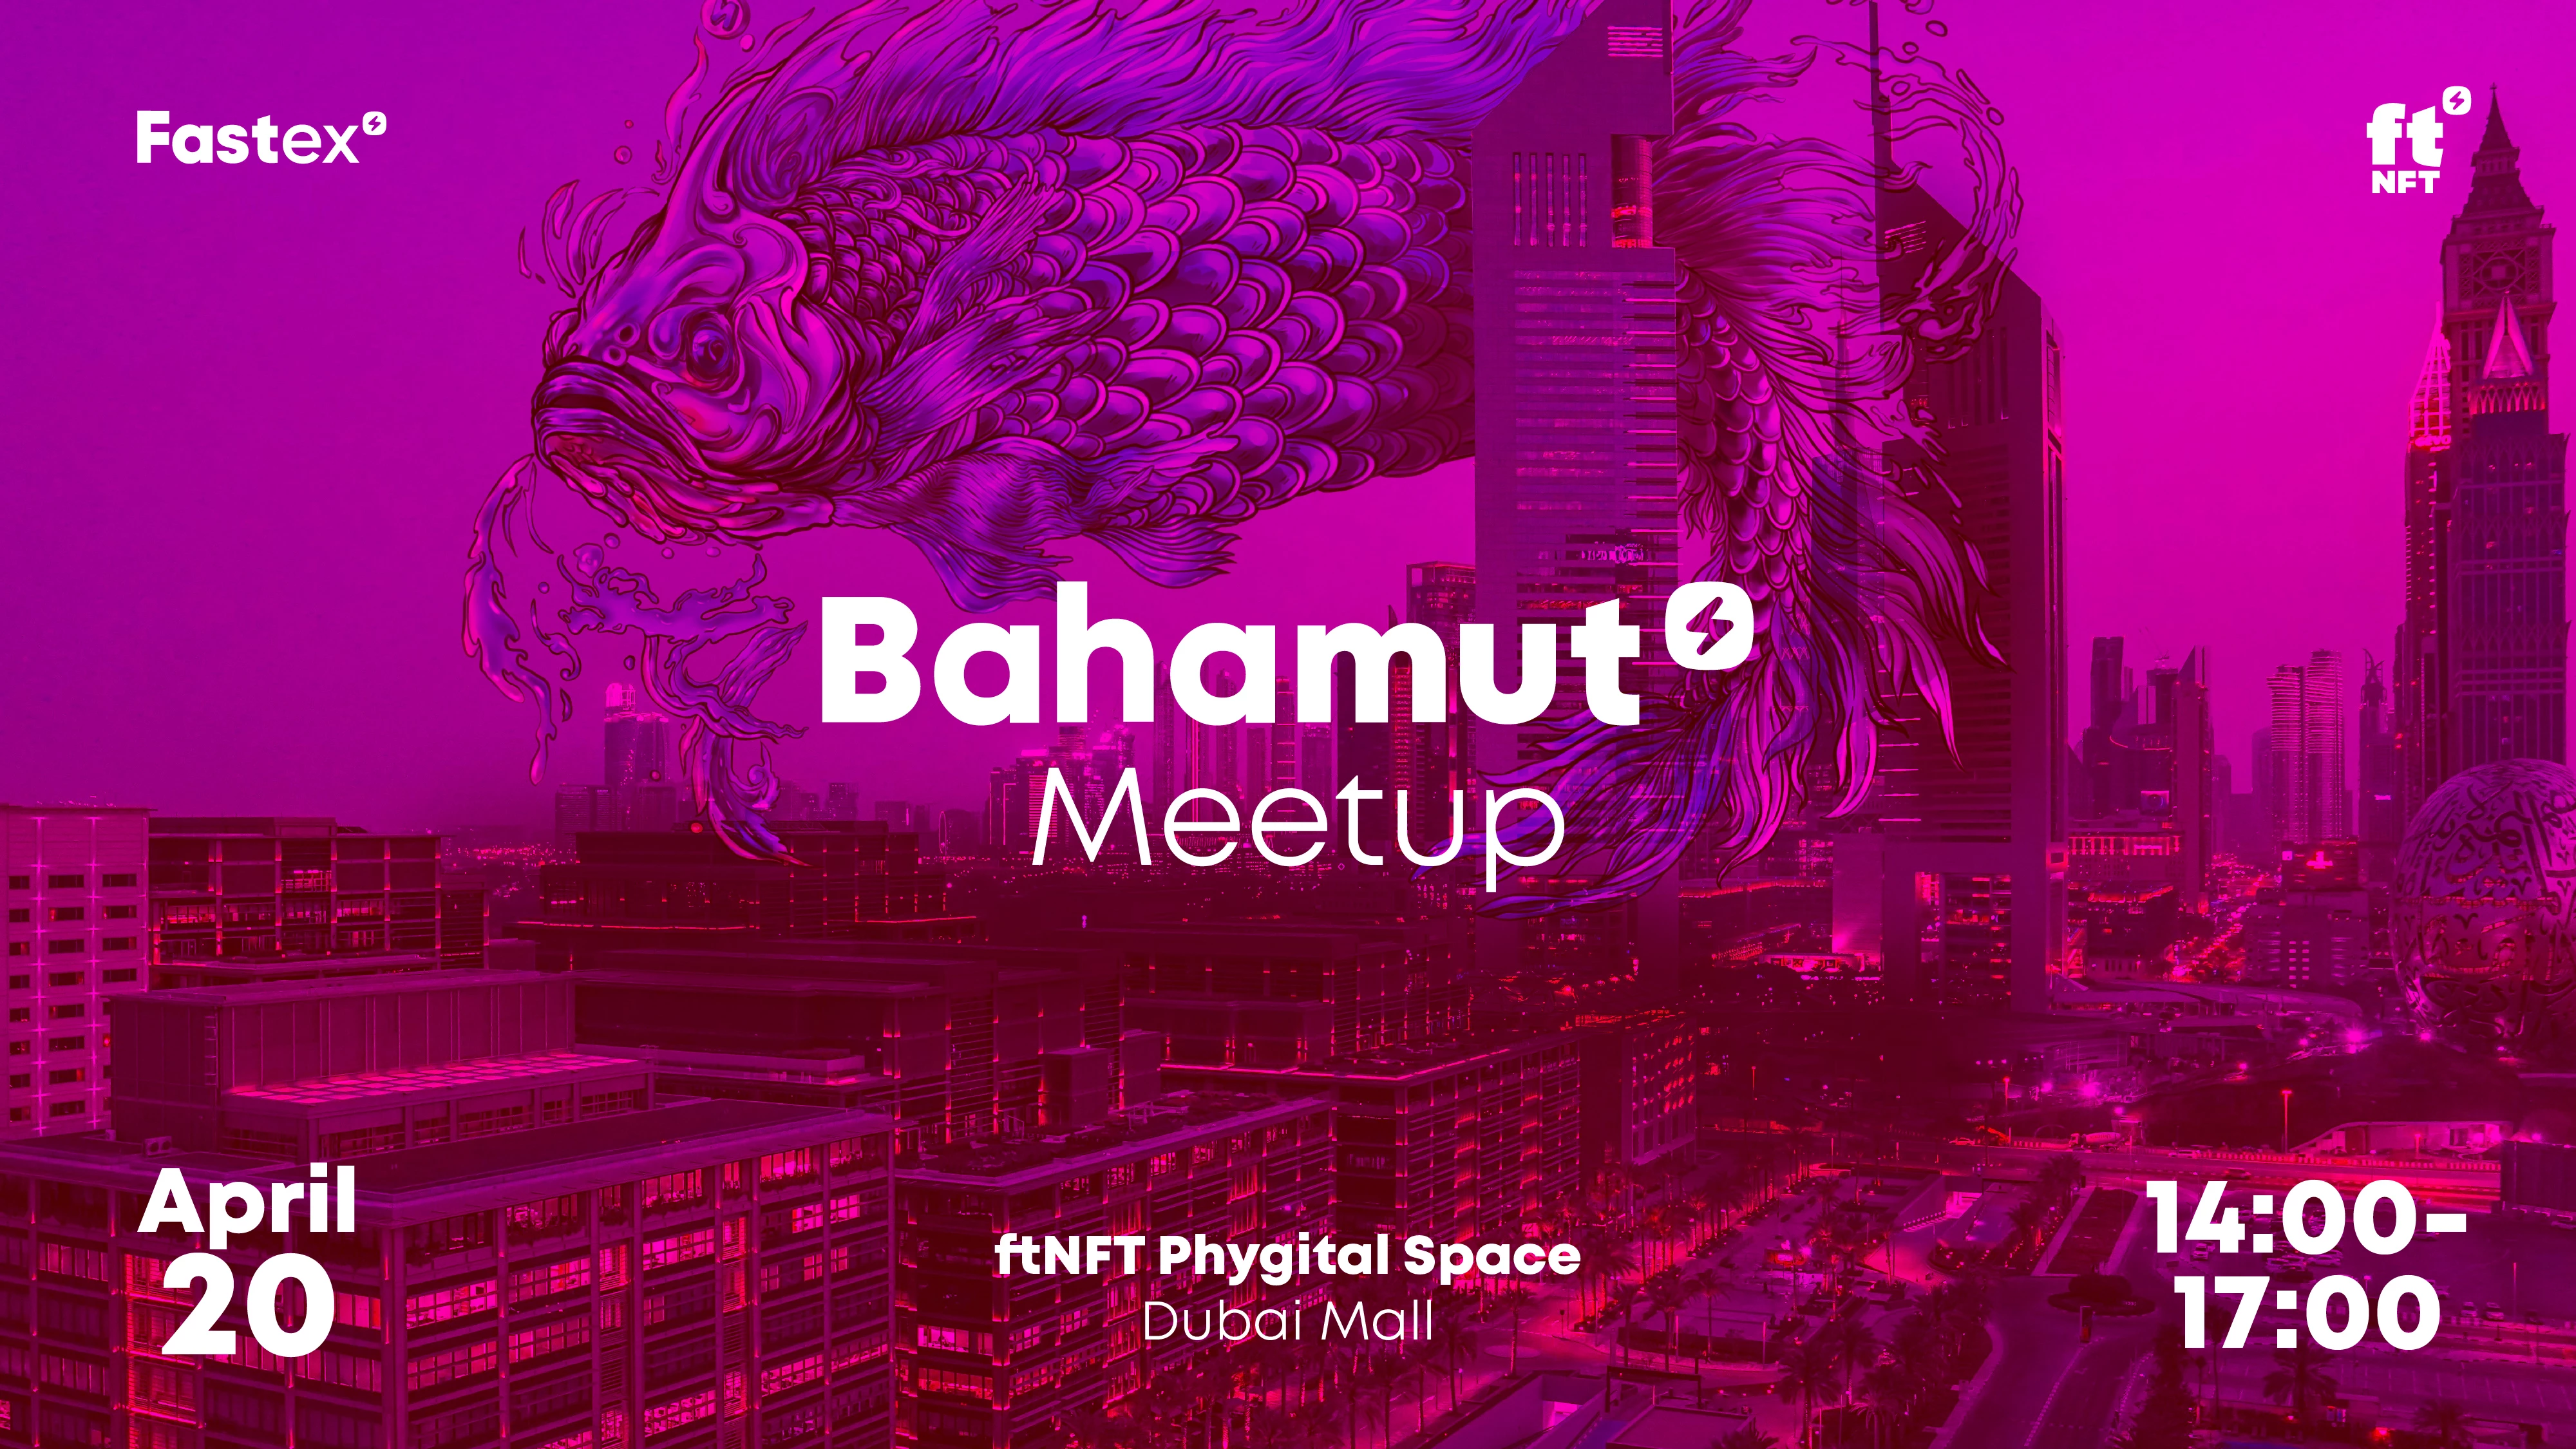 Bahamut Meetup to be held during Token 2049 in Dubai on April 20